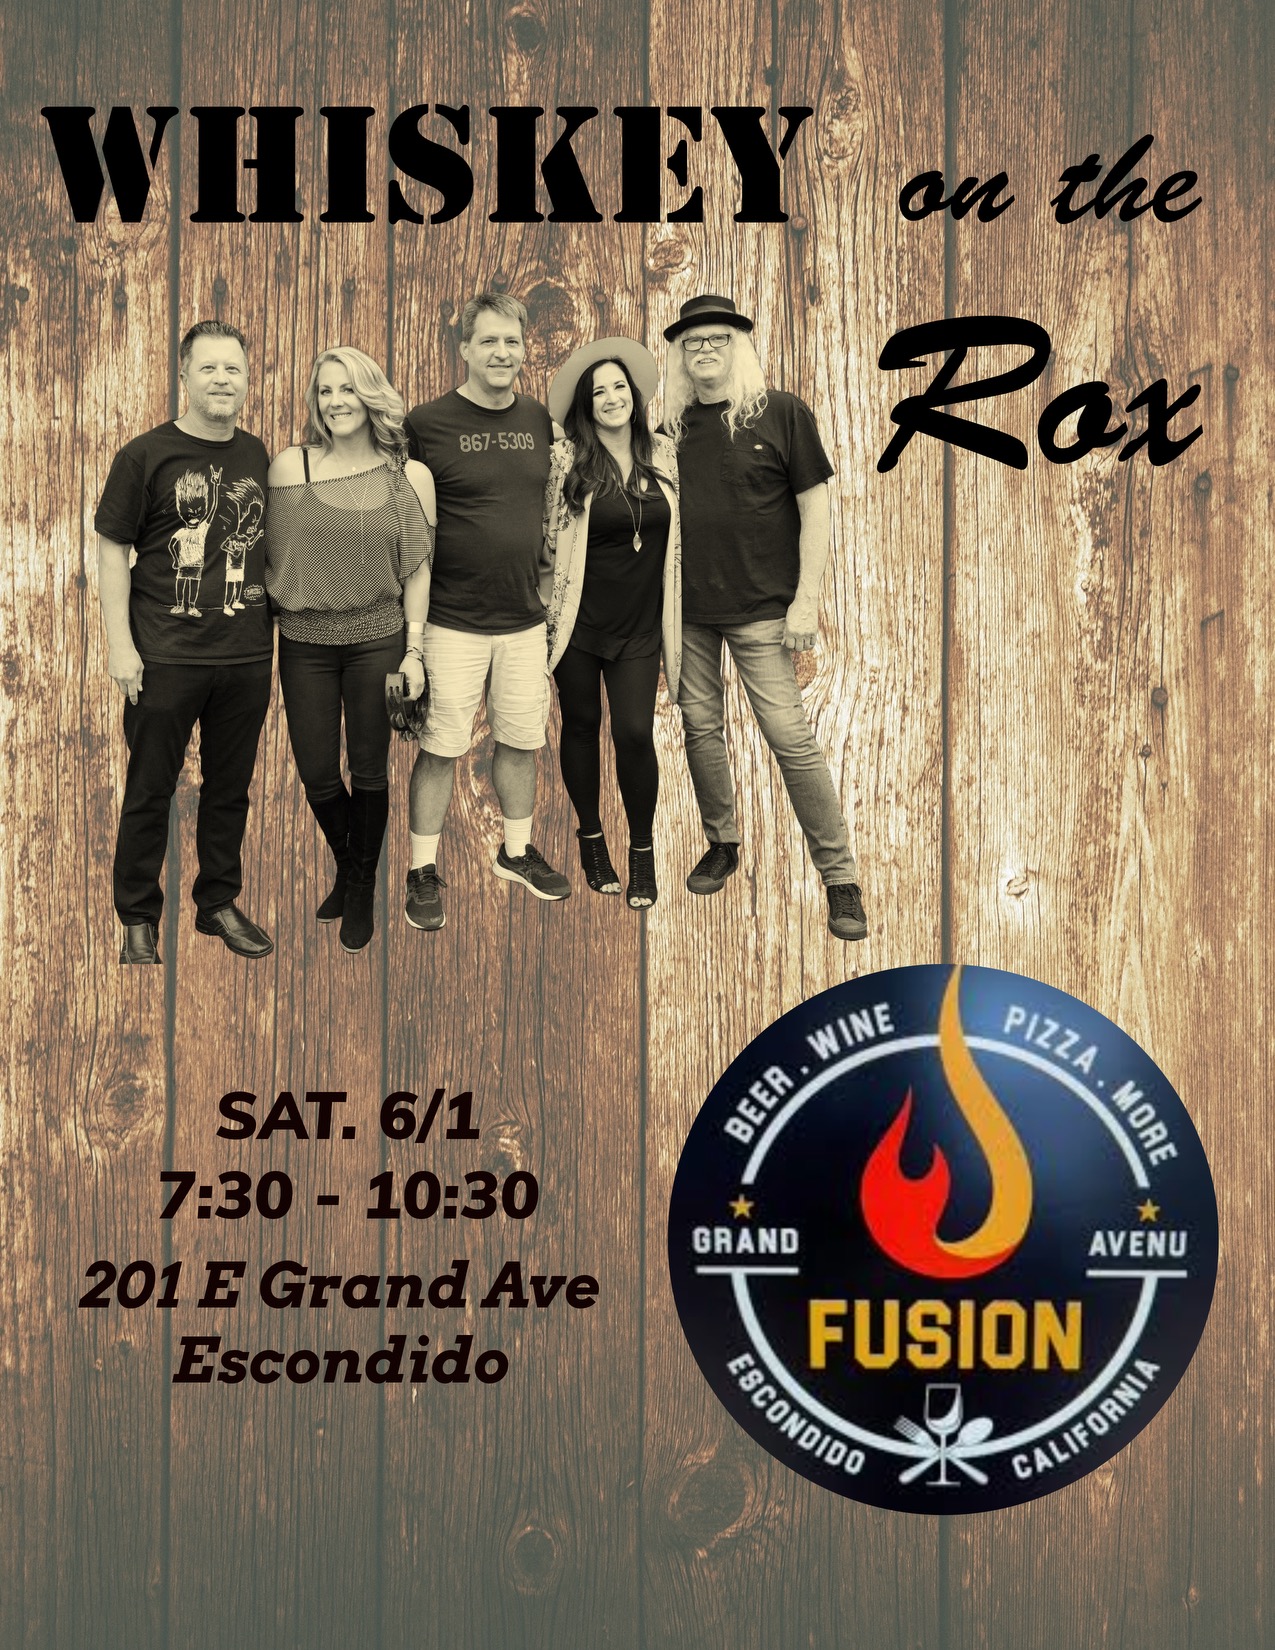 Live Music Whiskey on the Rox – Fusion